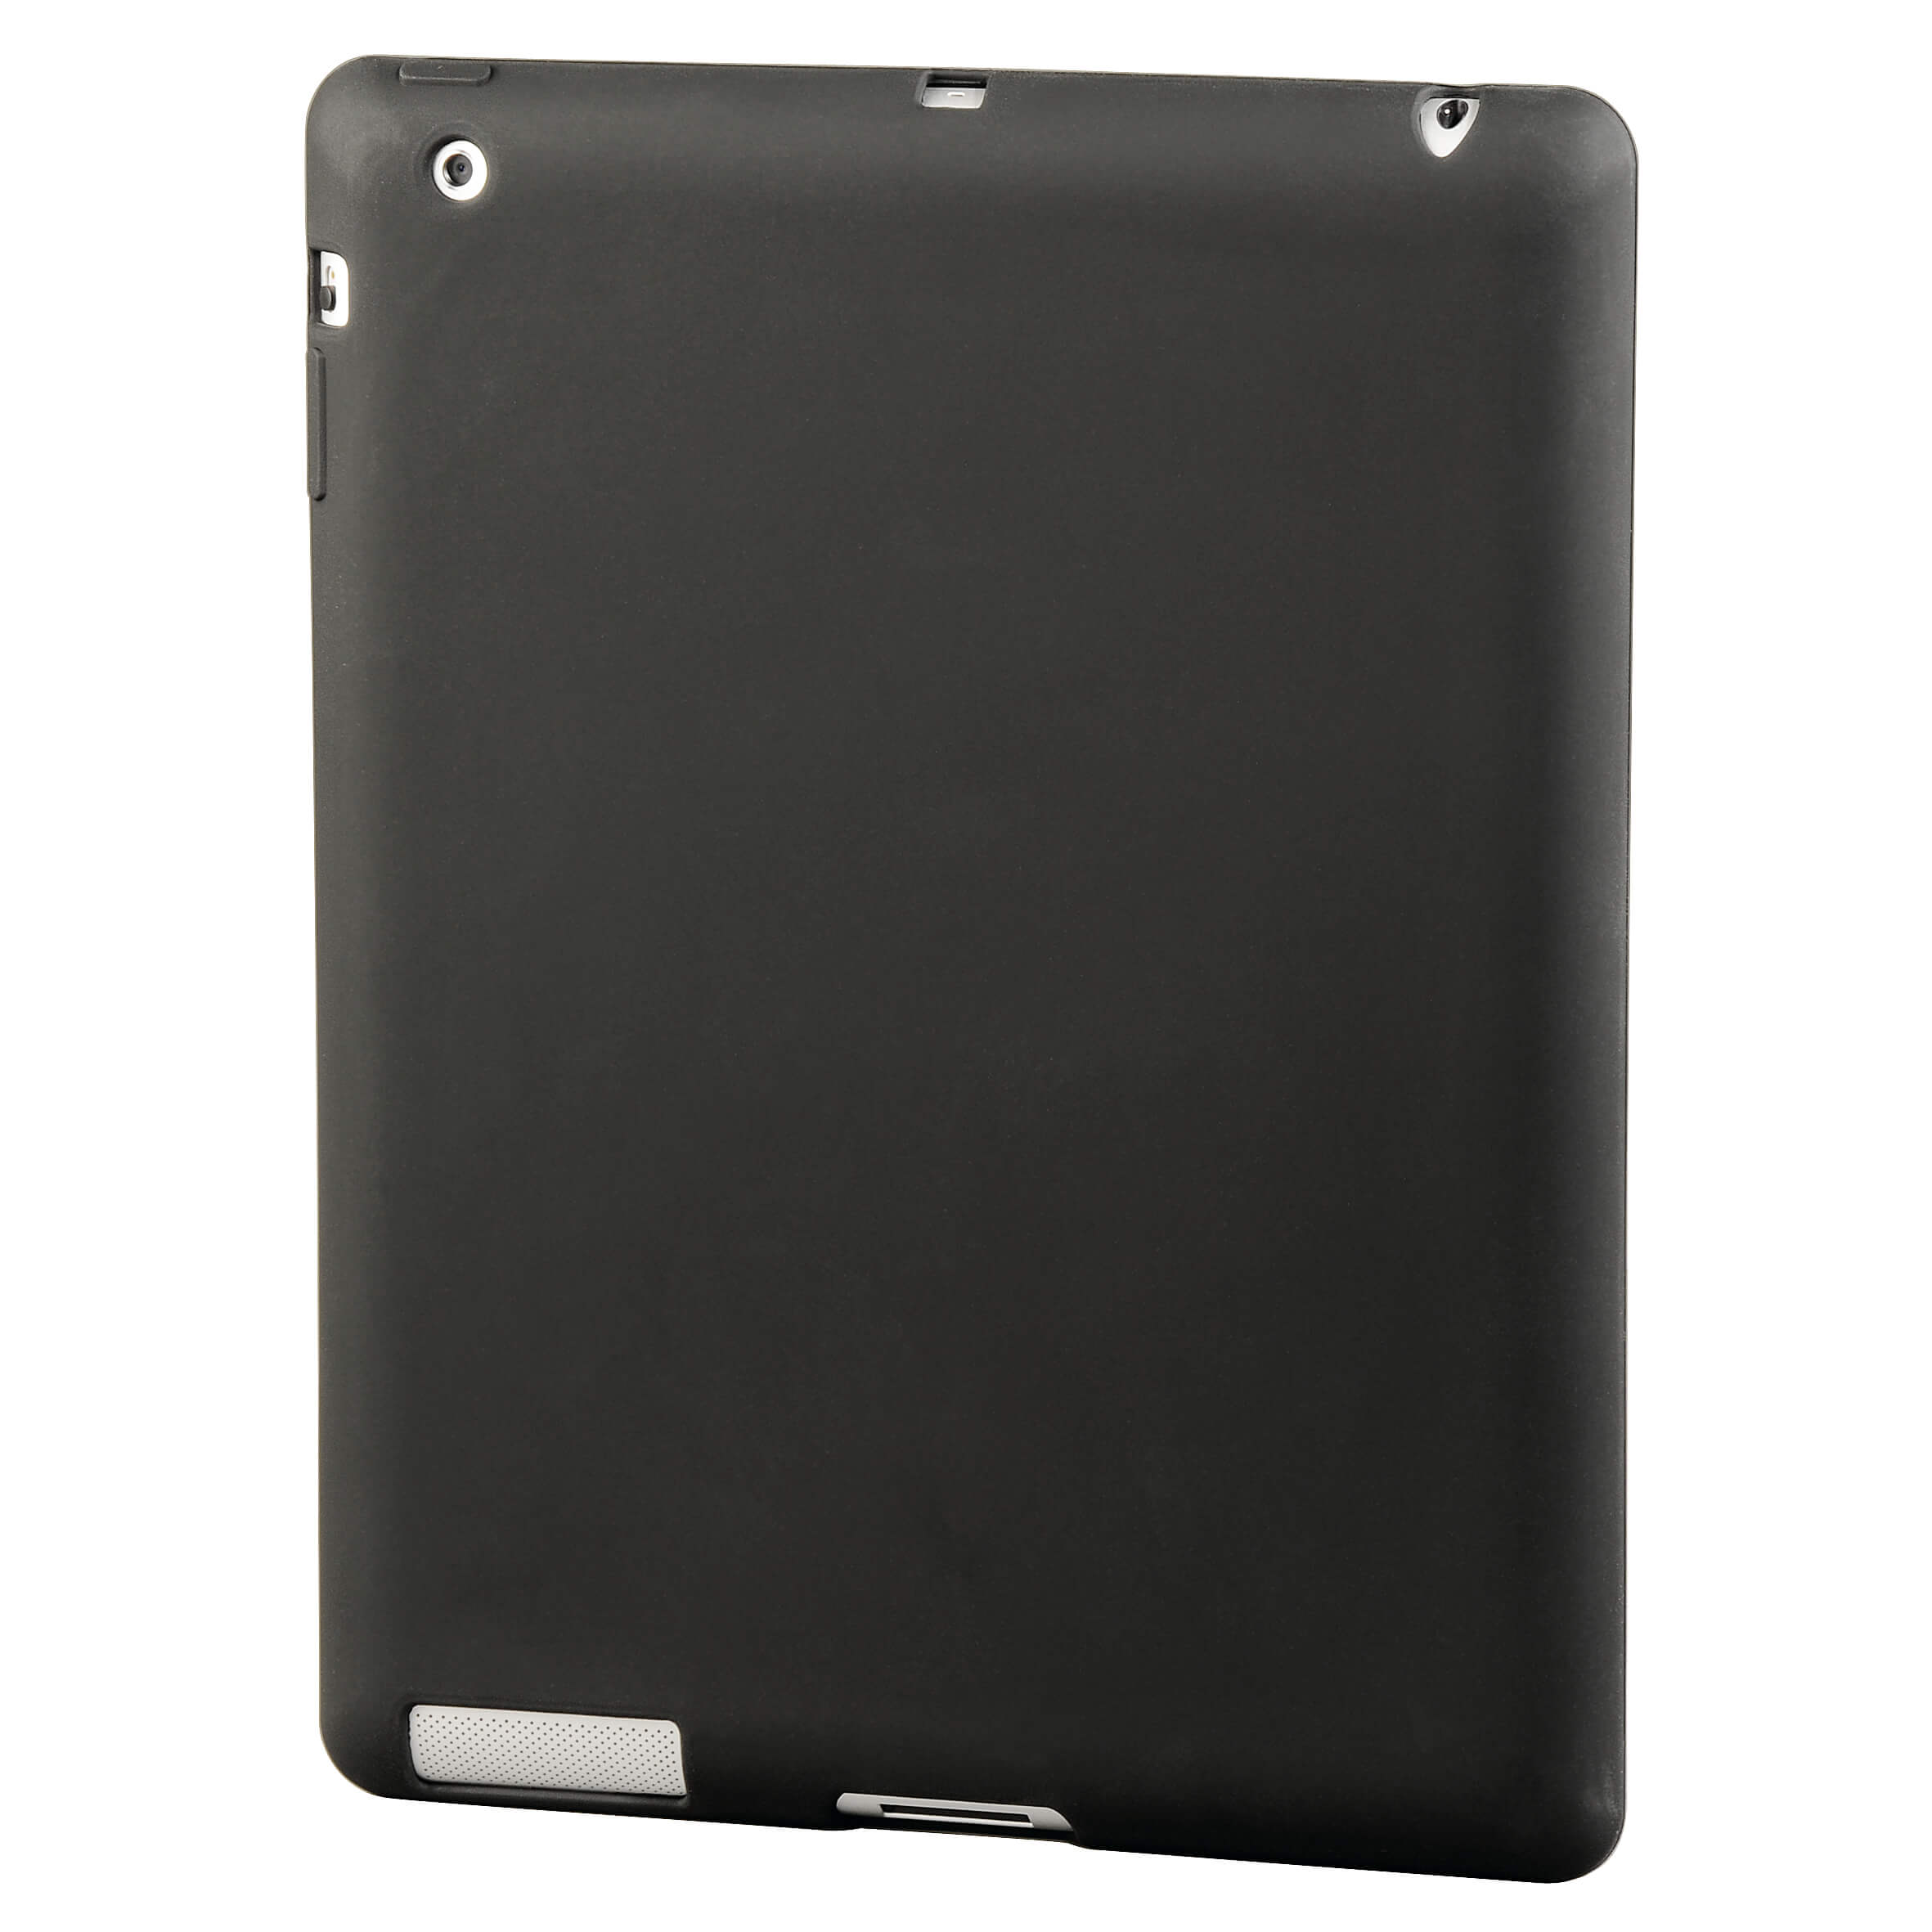 Protective Silicone Cover for iPad 2, black